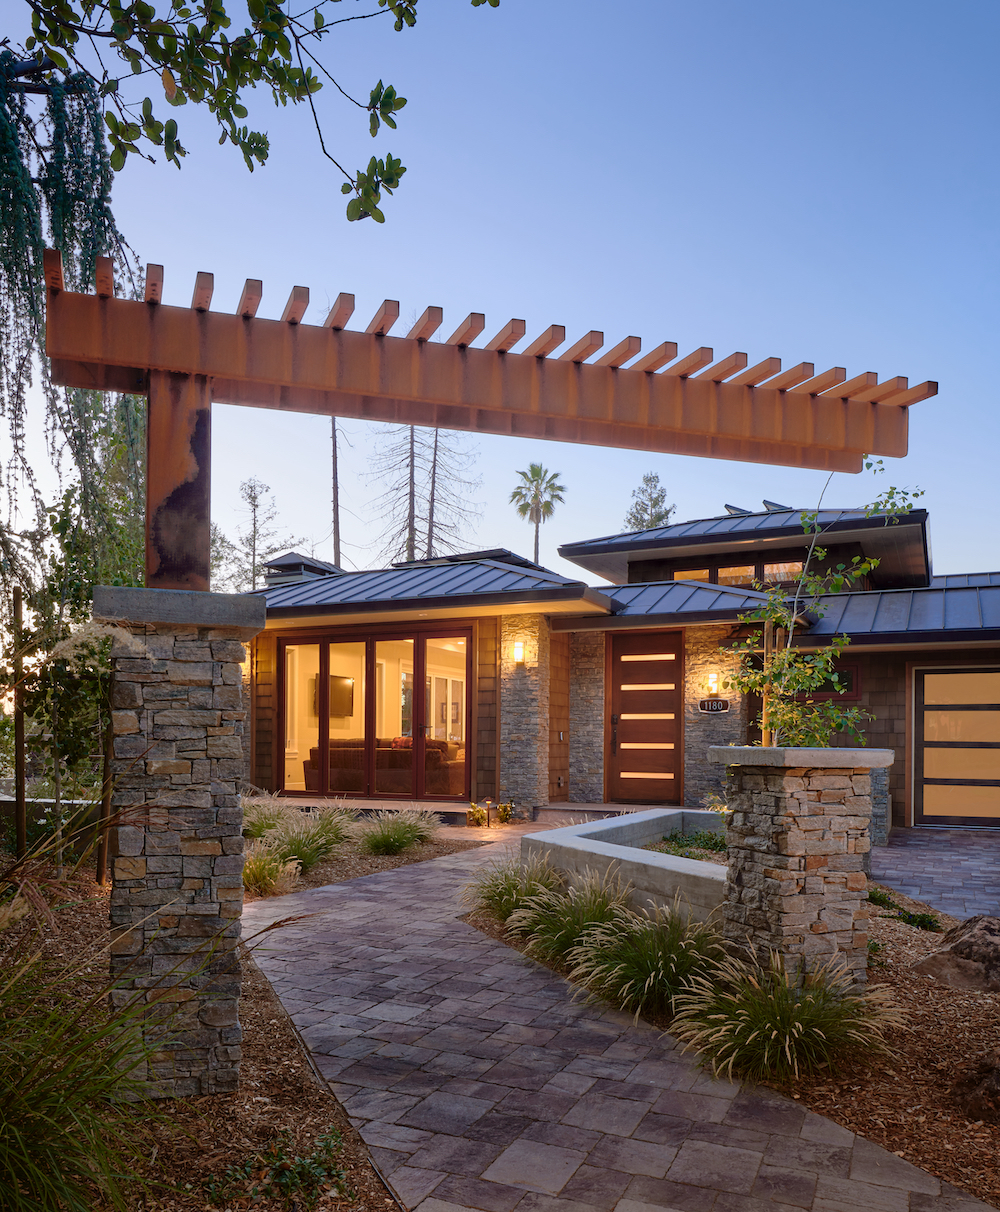 Frank Lloyd Wright inspired home with walk-out basement located in Los Altos.